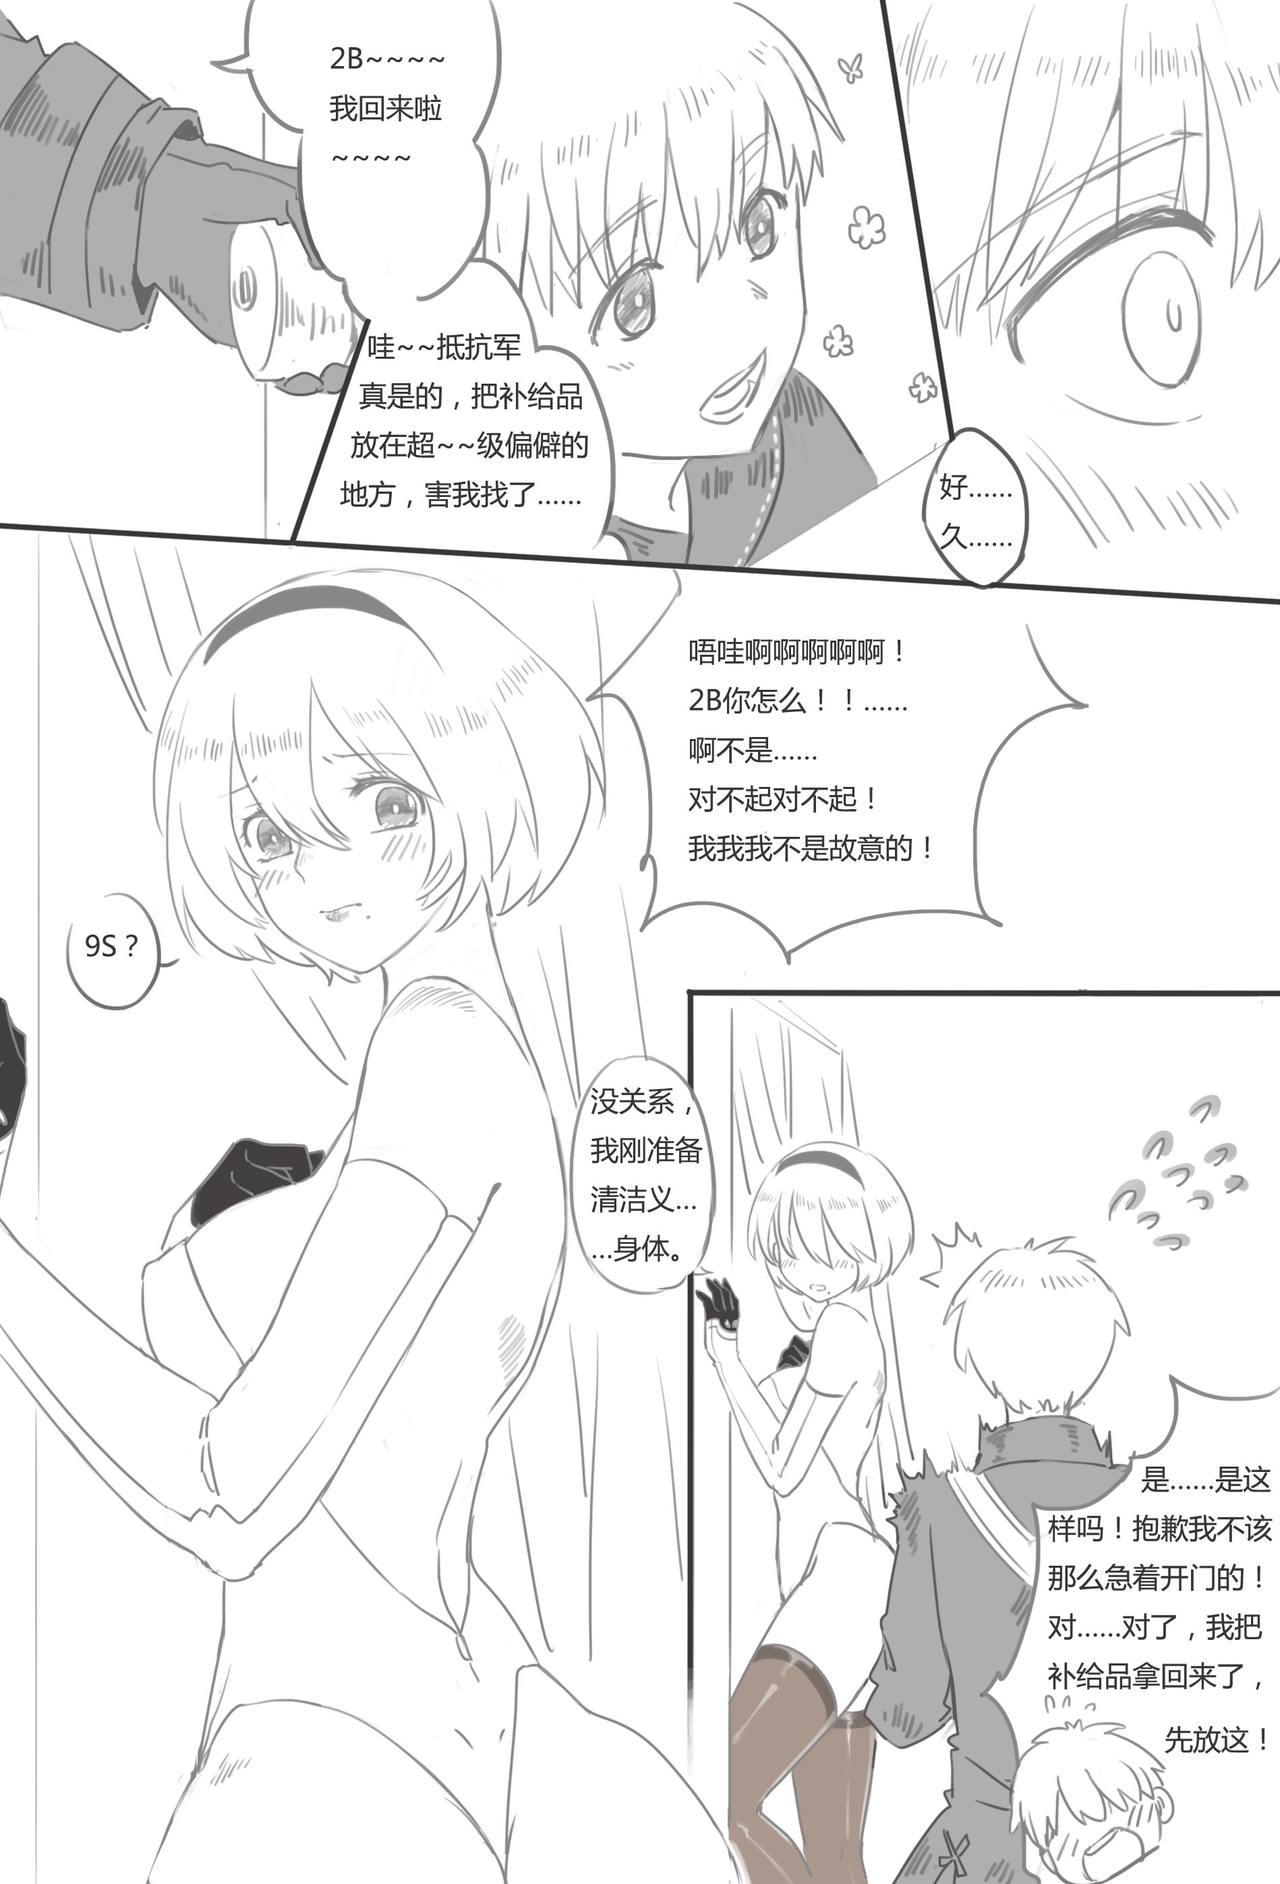 Bondagesex [WS] 9Sx2B - Life after the [E] end. (NieR:Automata) [Chinese] - Nier automata Cunt - Page 3